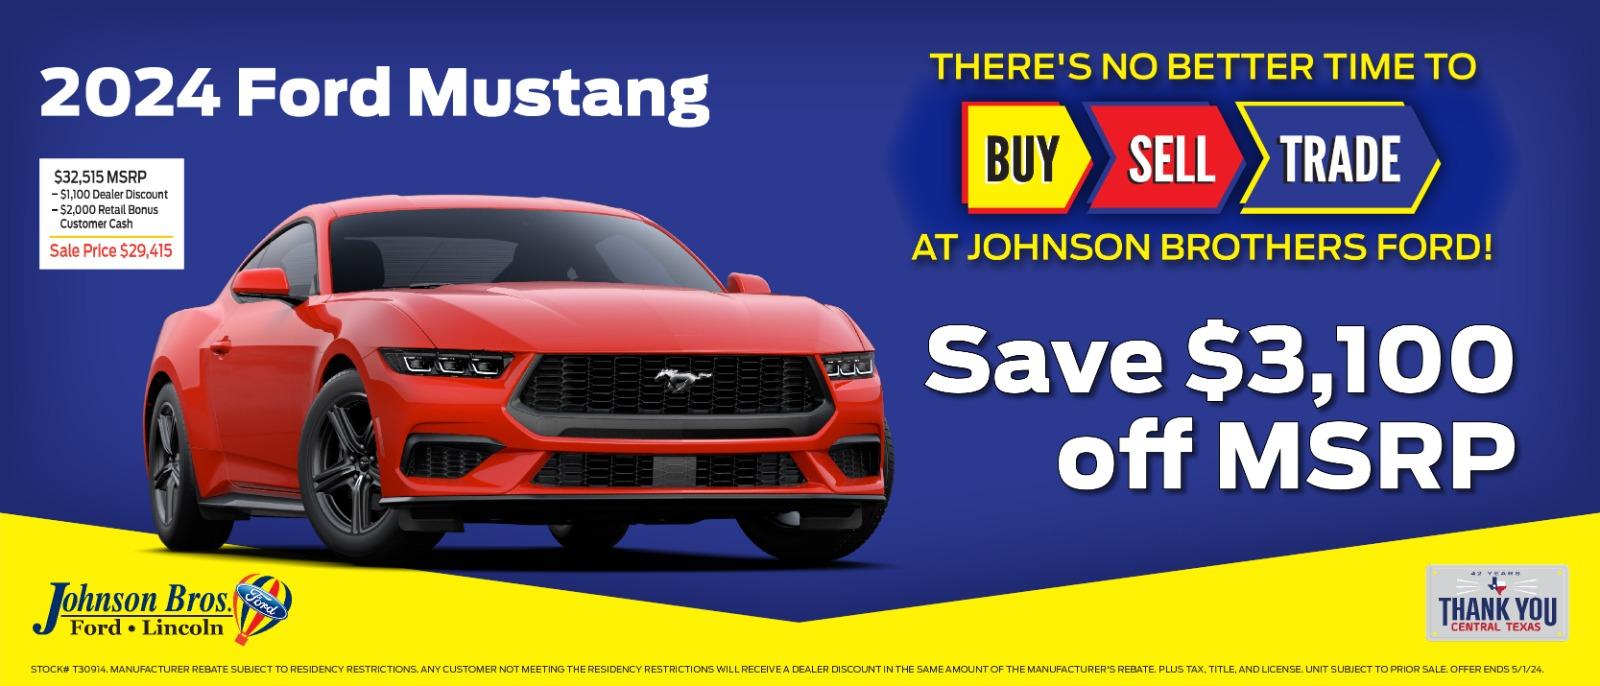 2024 Ford Mustang

Save $3,100 off MSRP